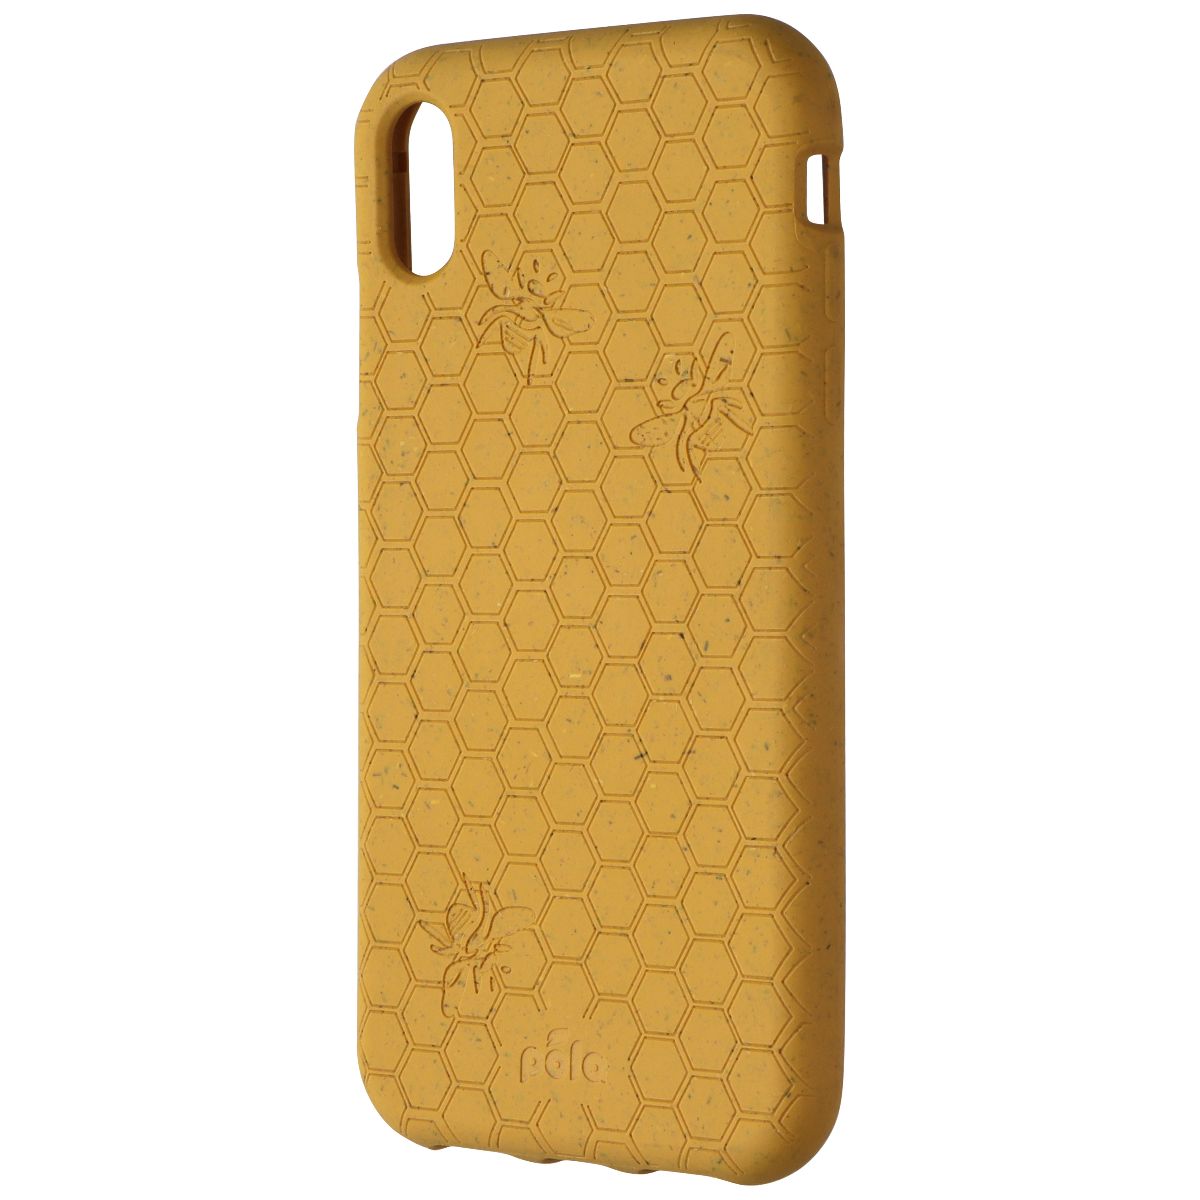 Pela Classic Series Flexible Case for Apple iPhone XS Max - Yellow